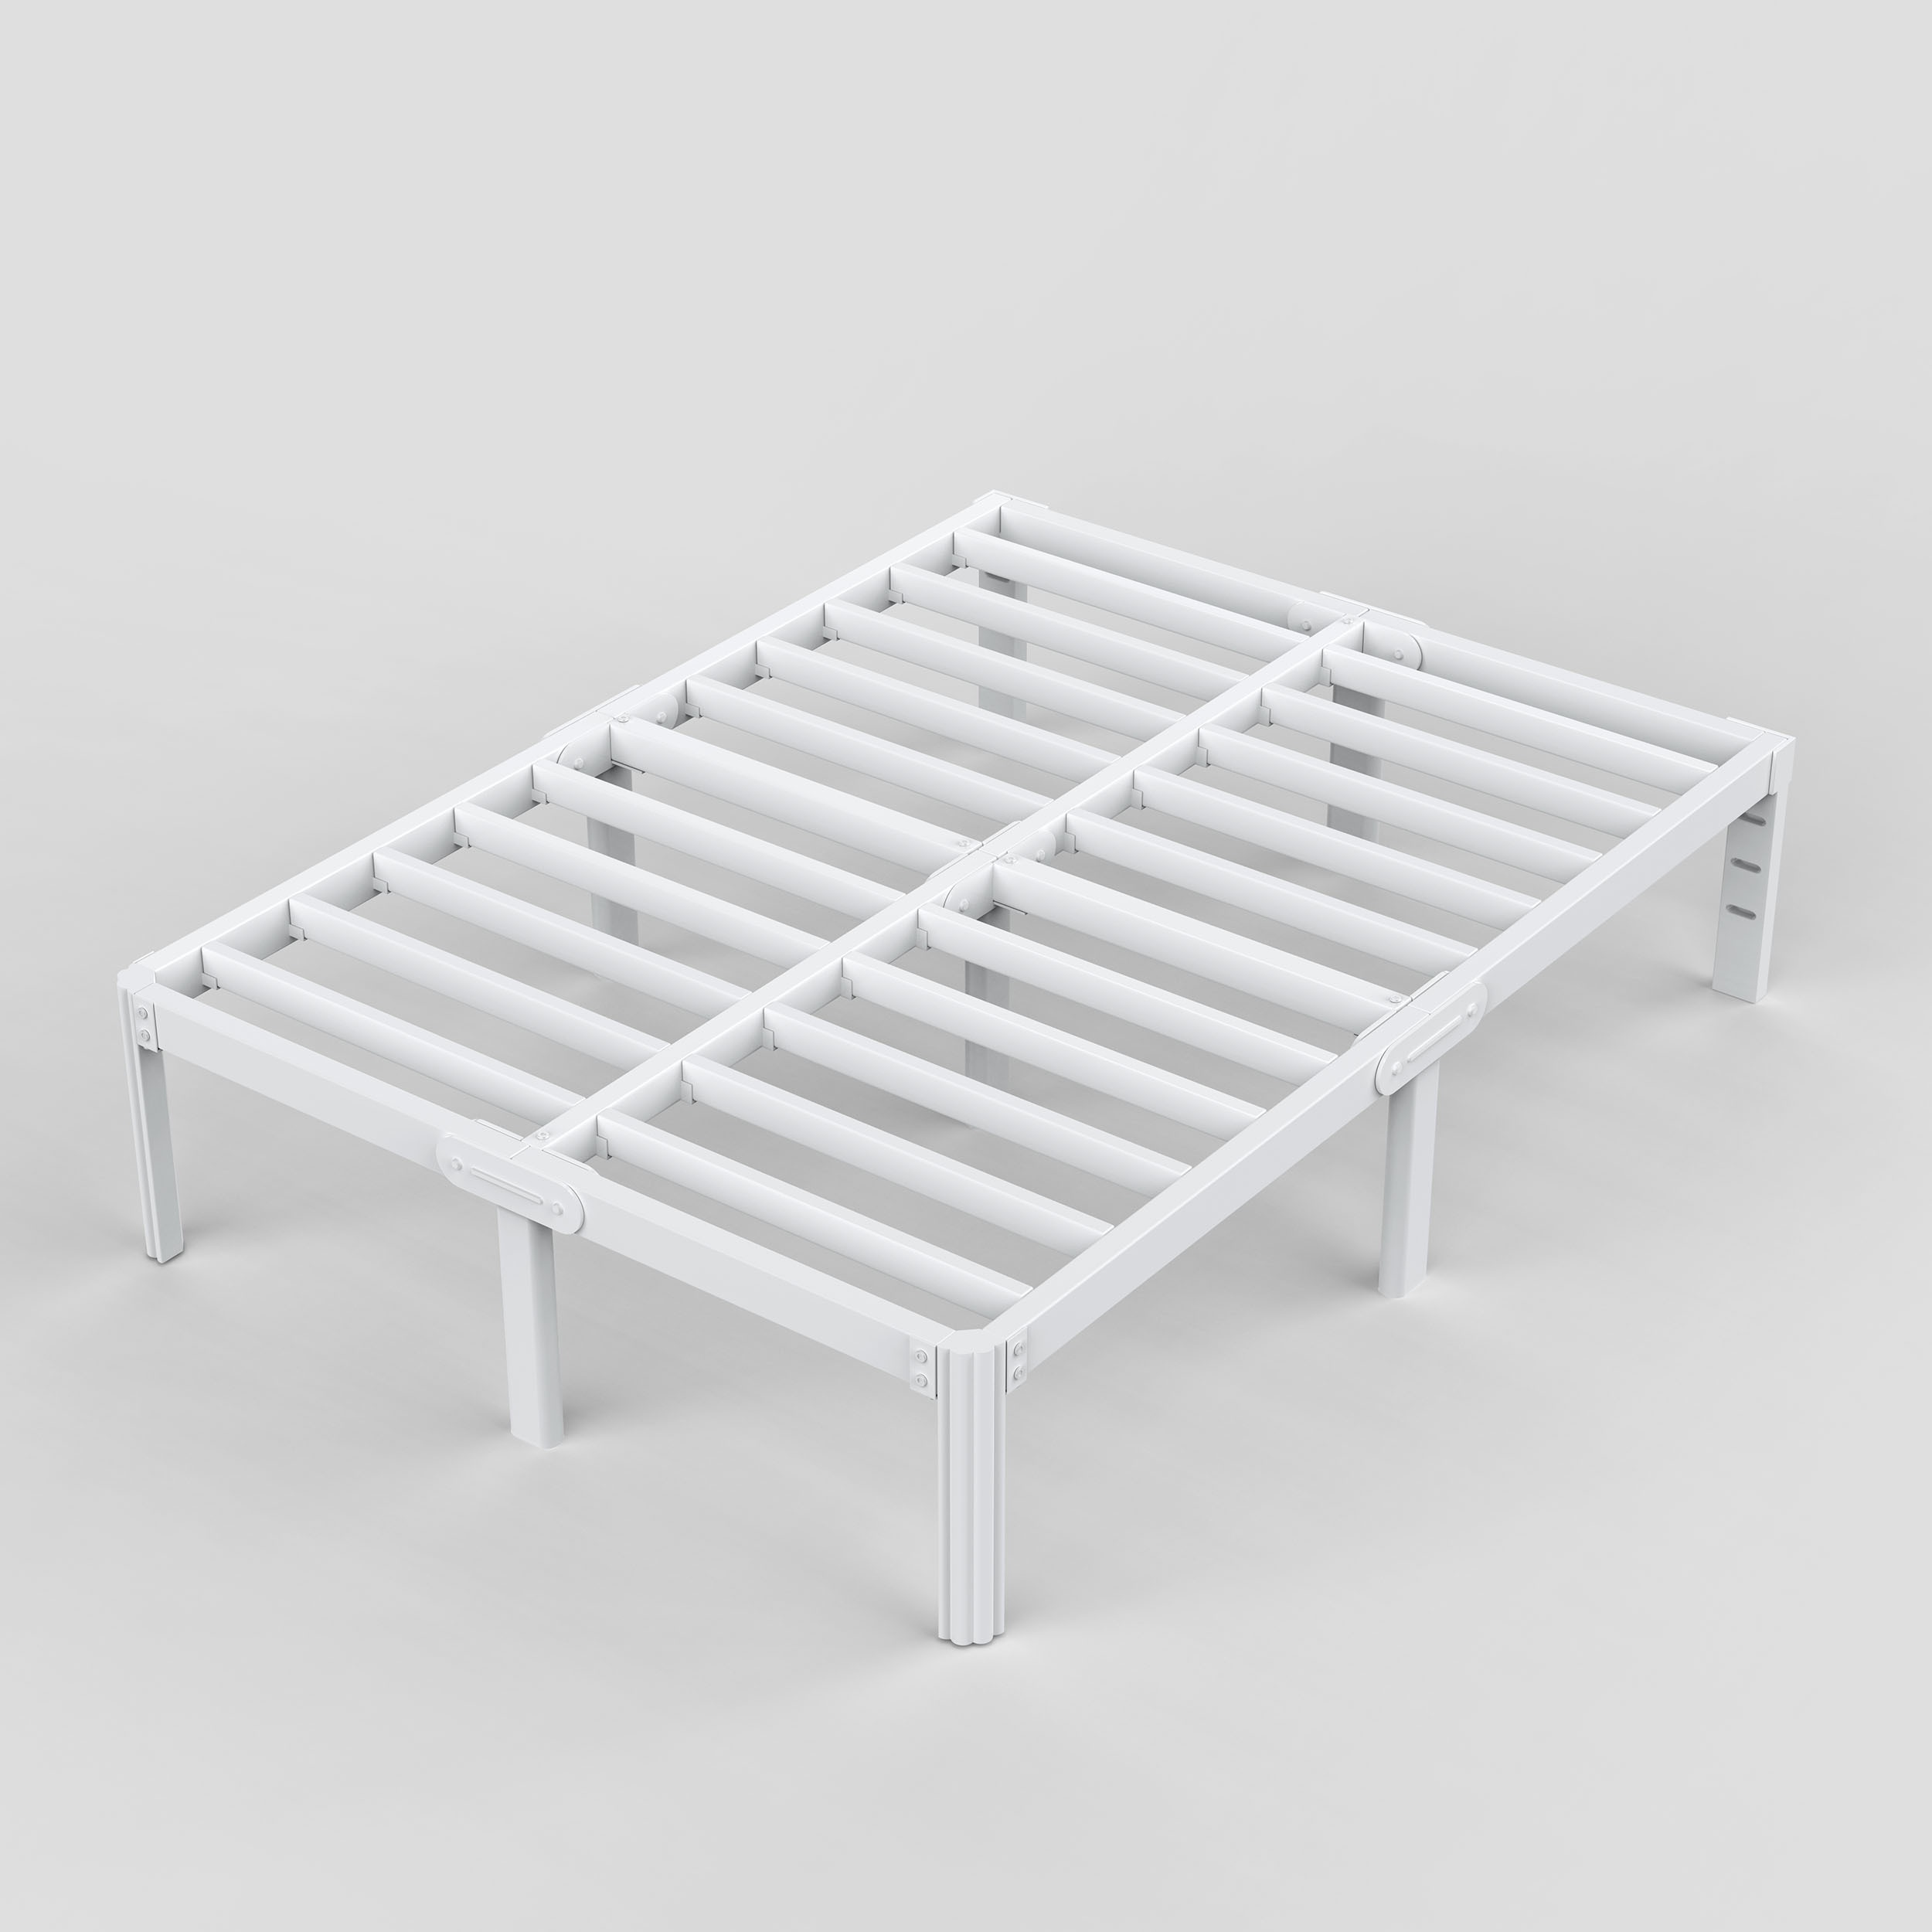 

14 Inch White Queen Bed Frame, Metal Bed Frame Queen Size Platform With Round Corner Leg, No Squeak Queen Bedframe With Storage, No Box Spring Needed, Heavy Duty, Easy Assembly